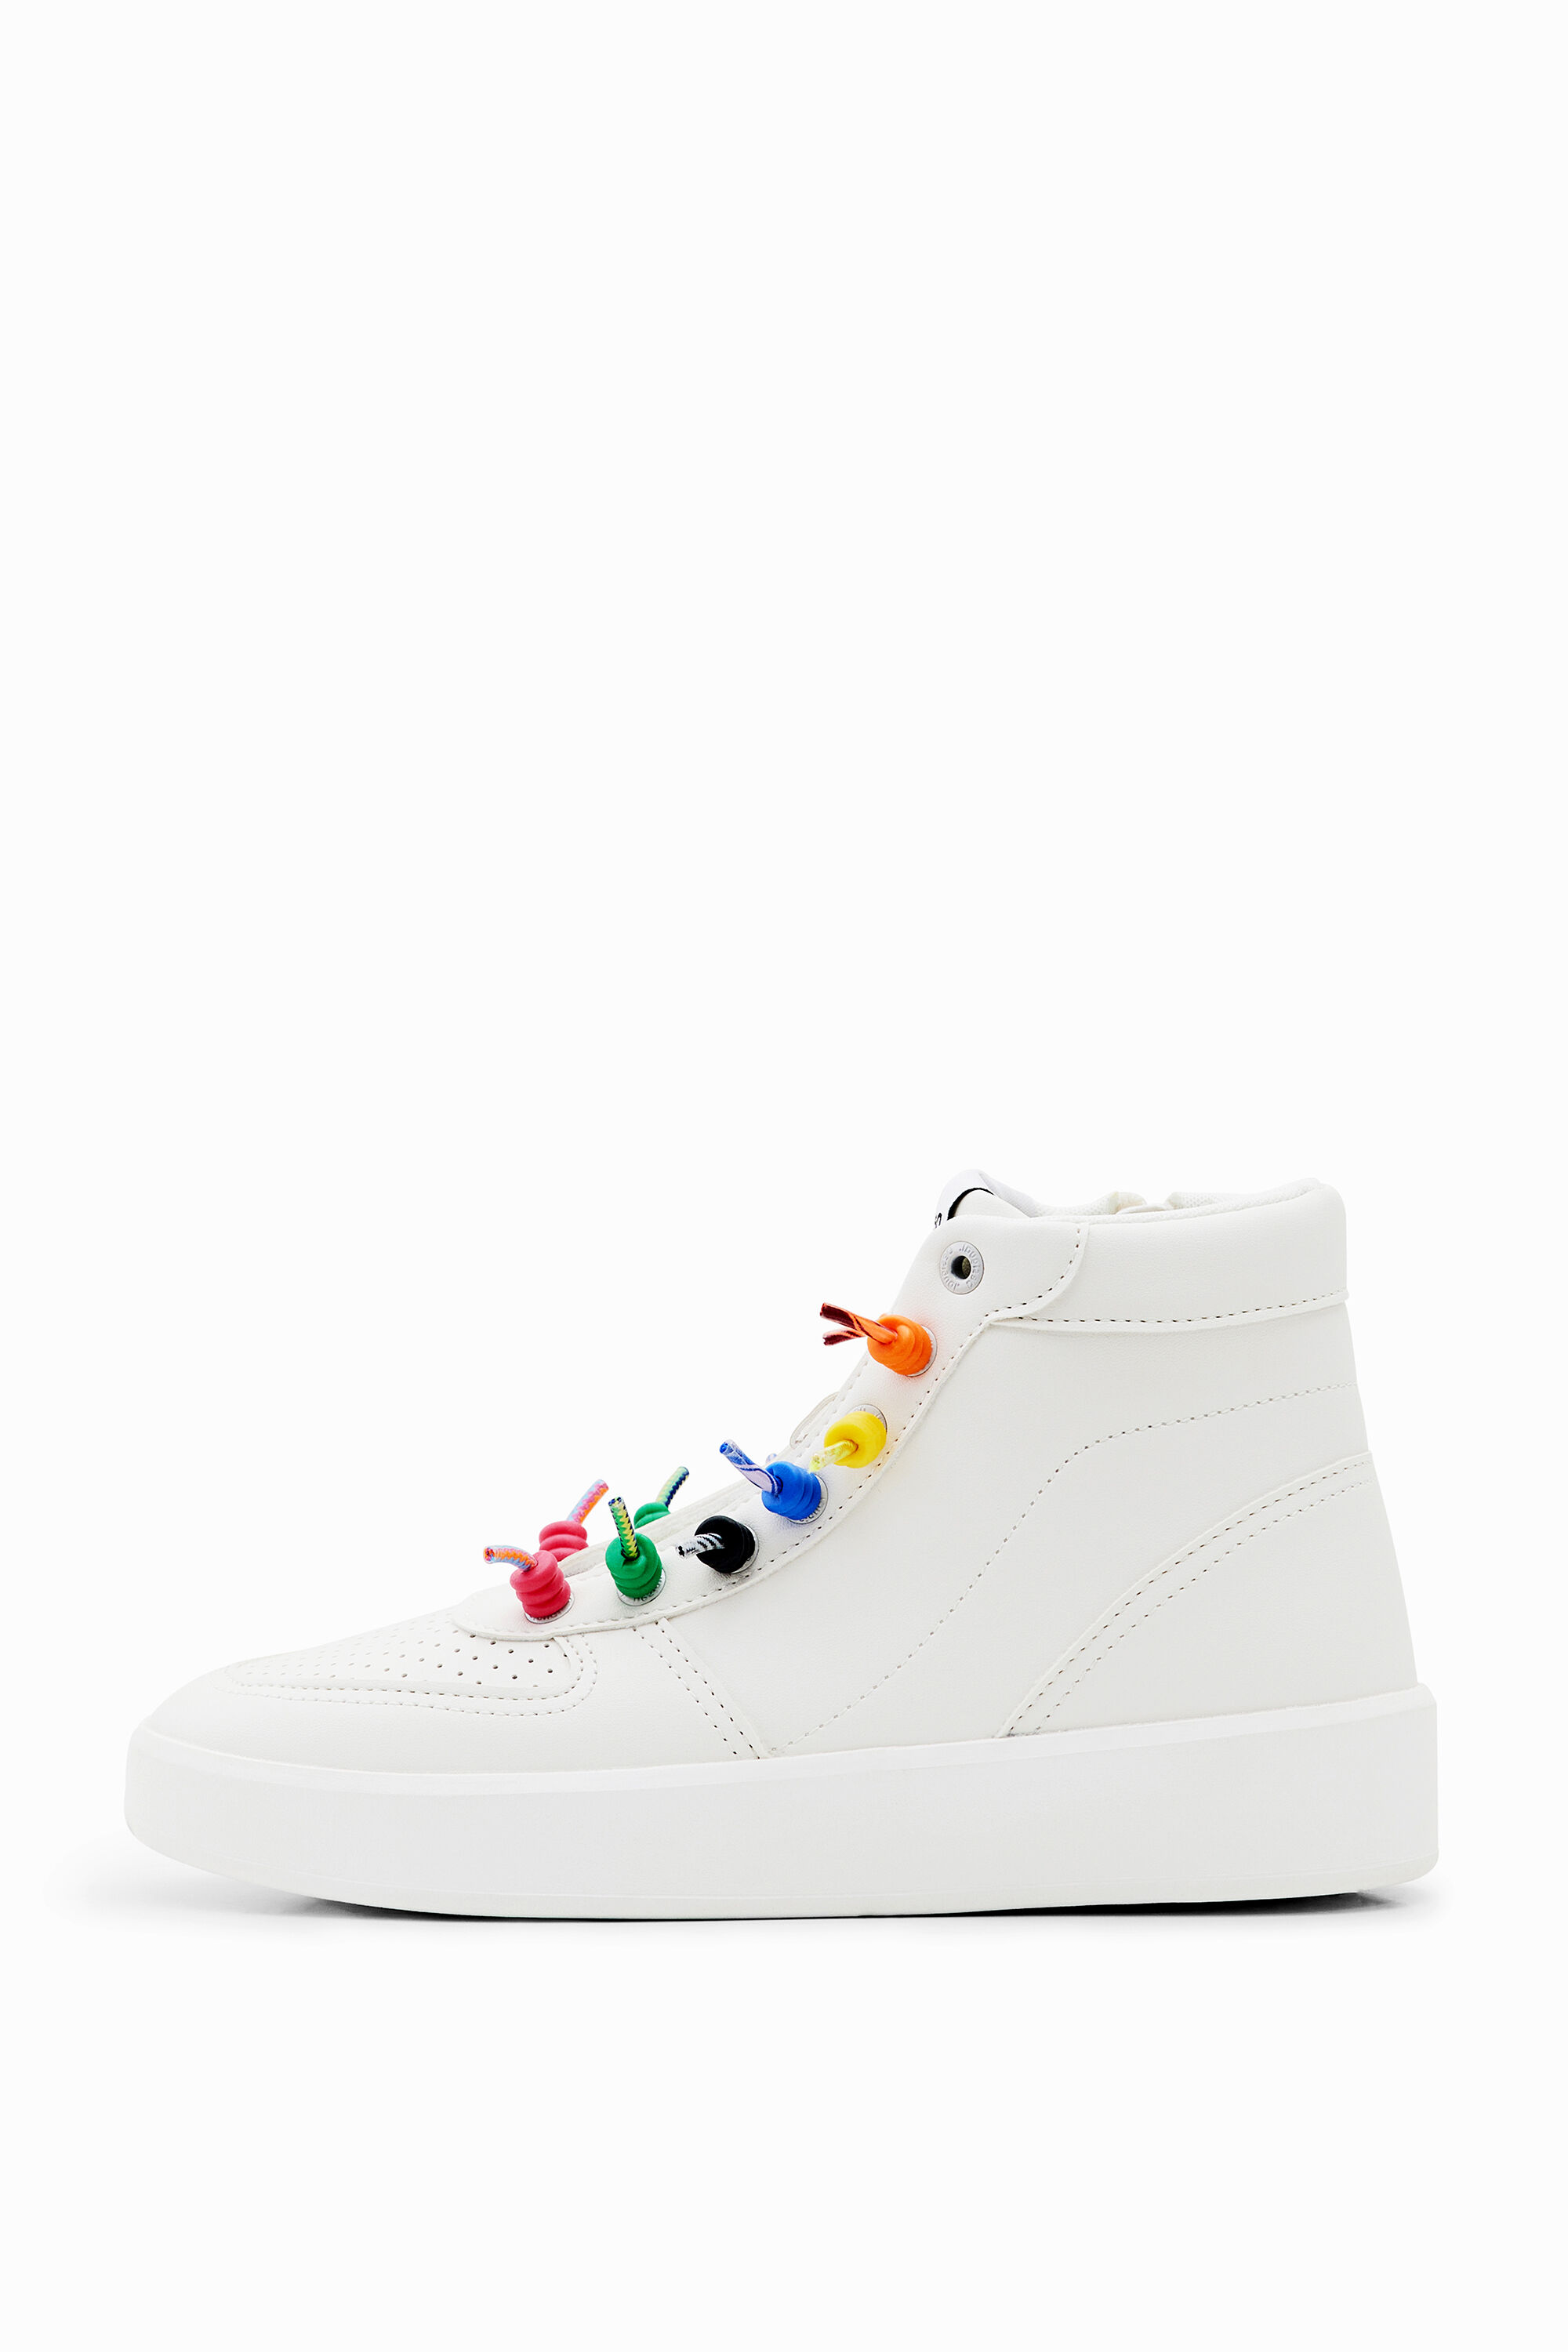 Rainbow lace high-top sneakers - WHITE - 41